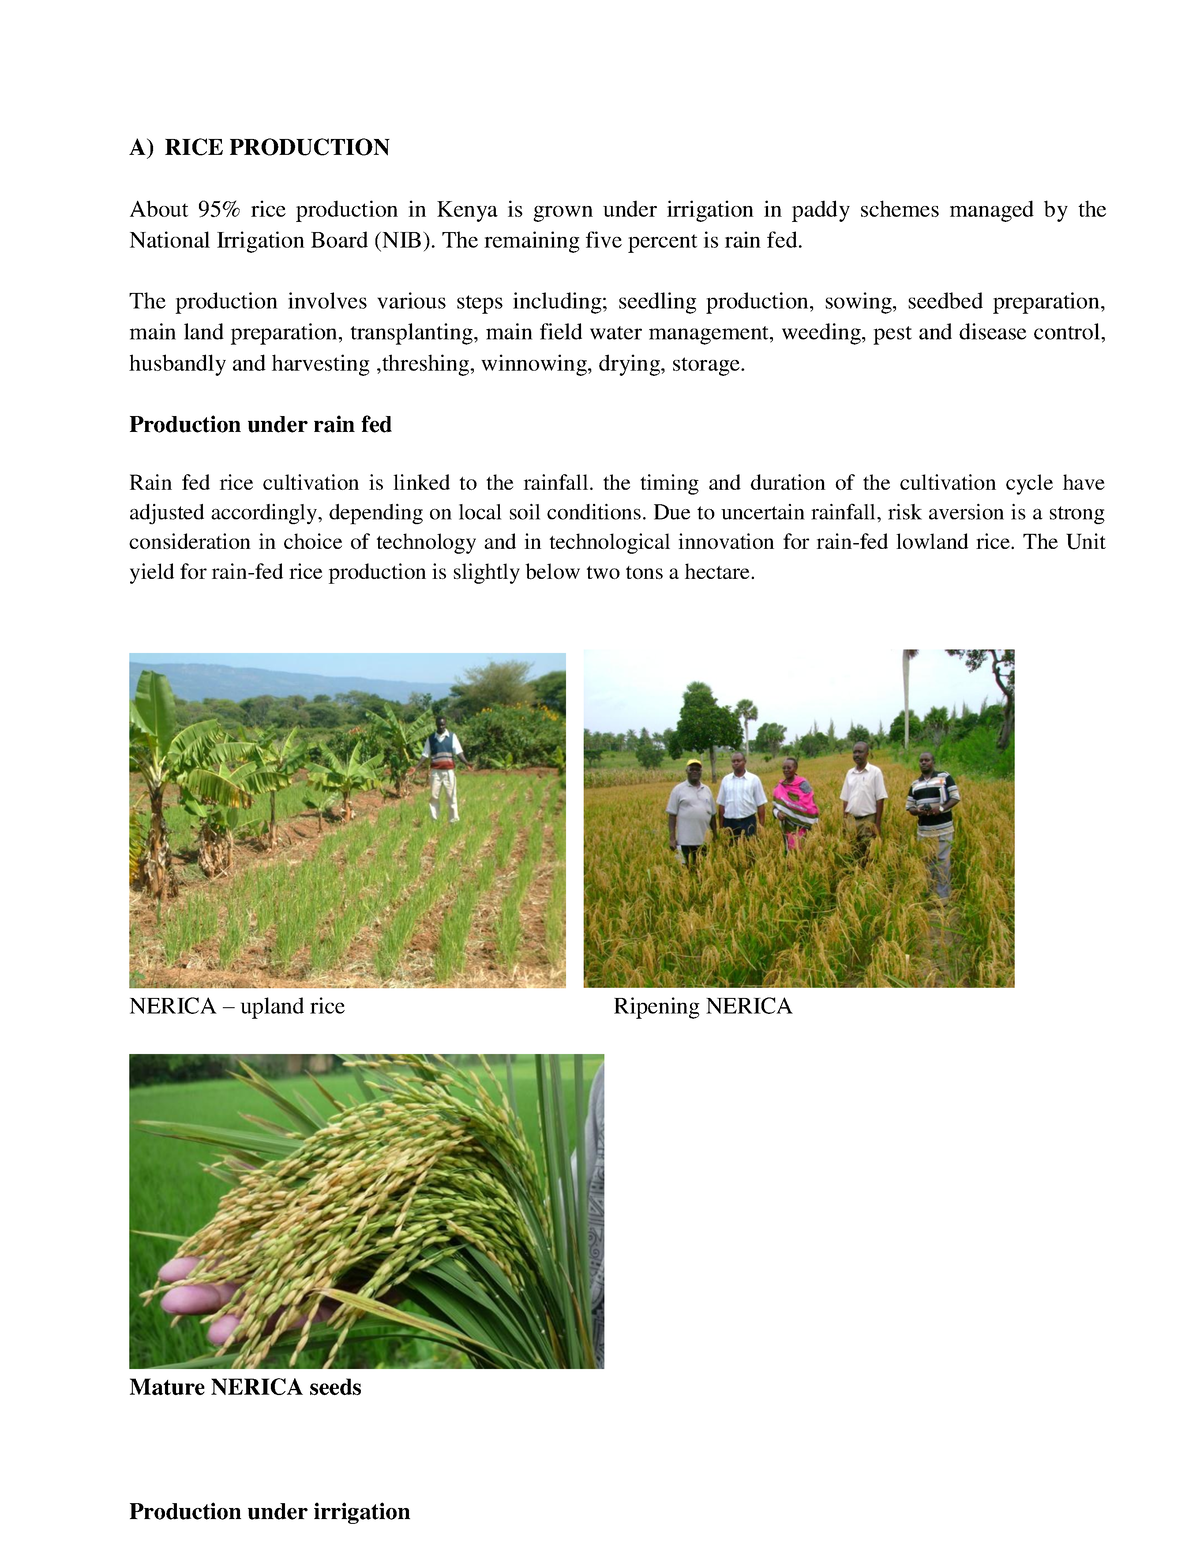 essay on rice production